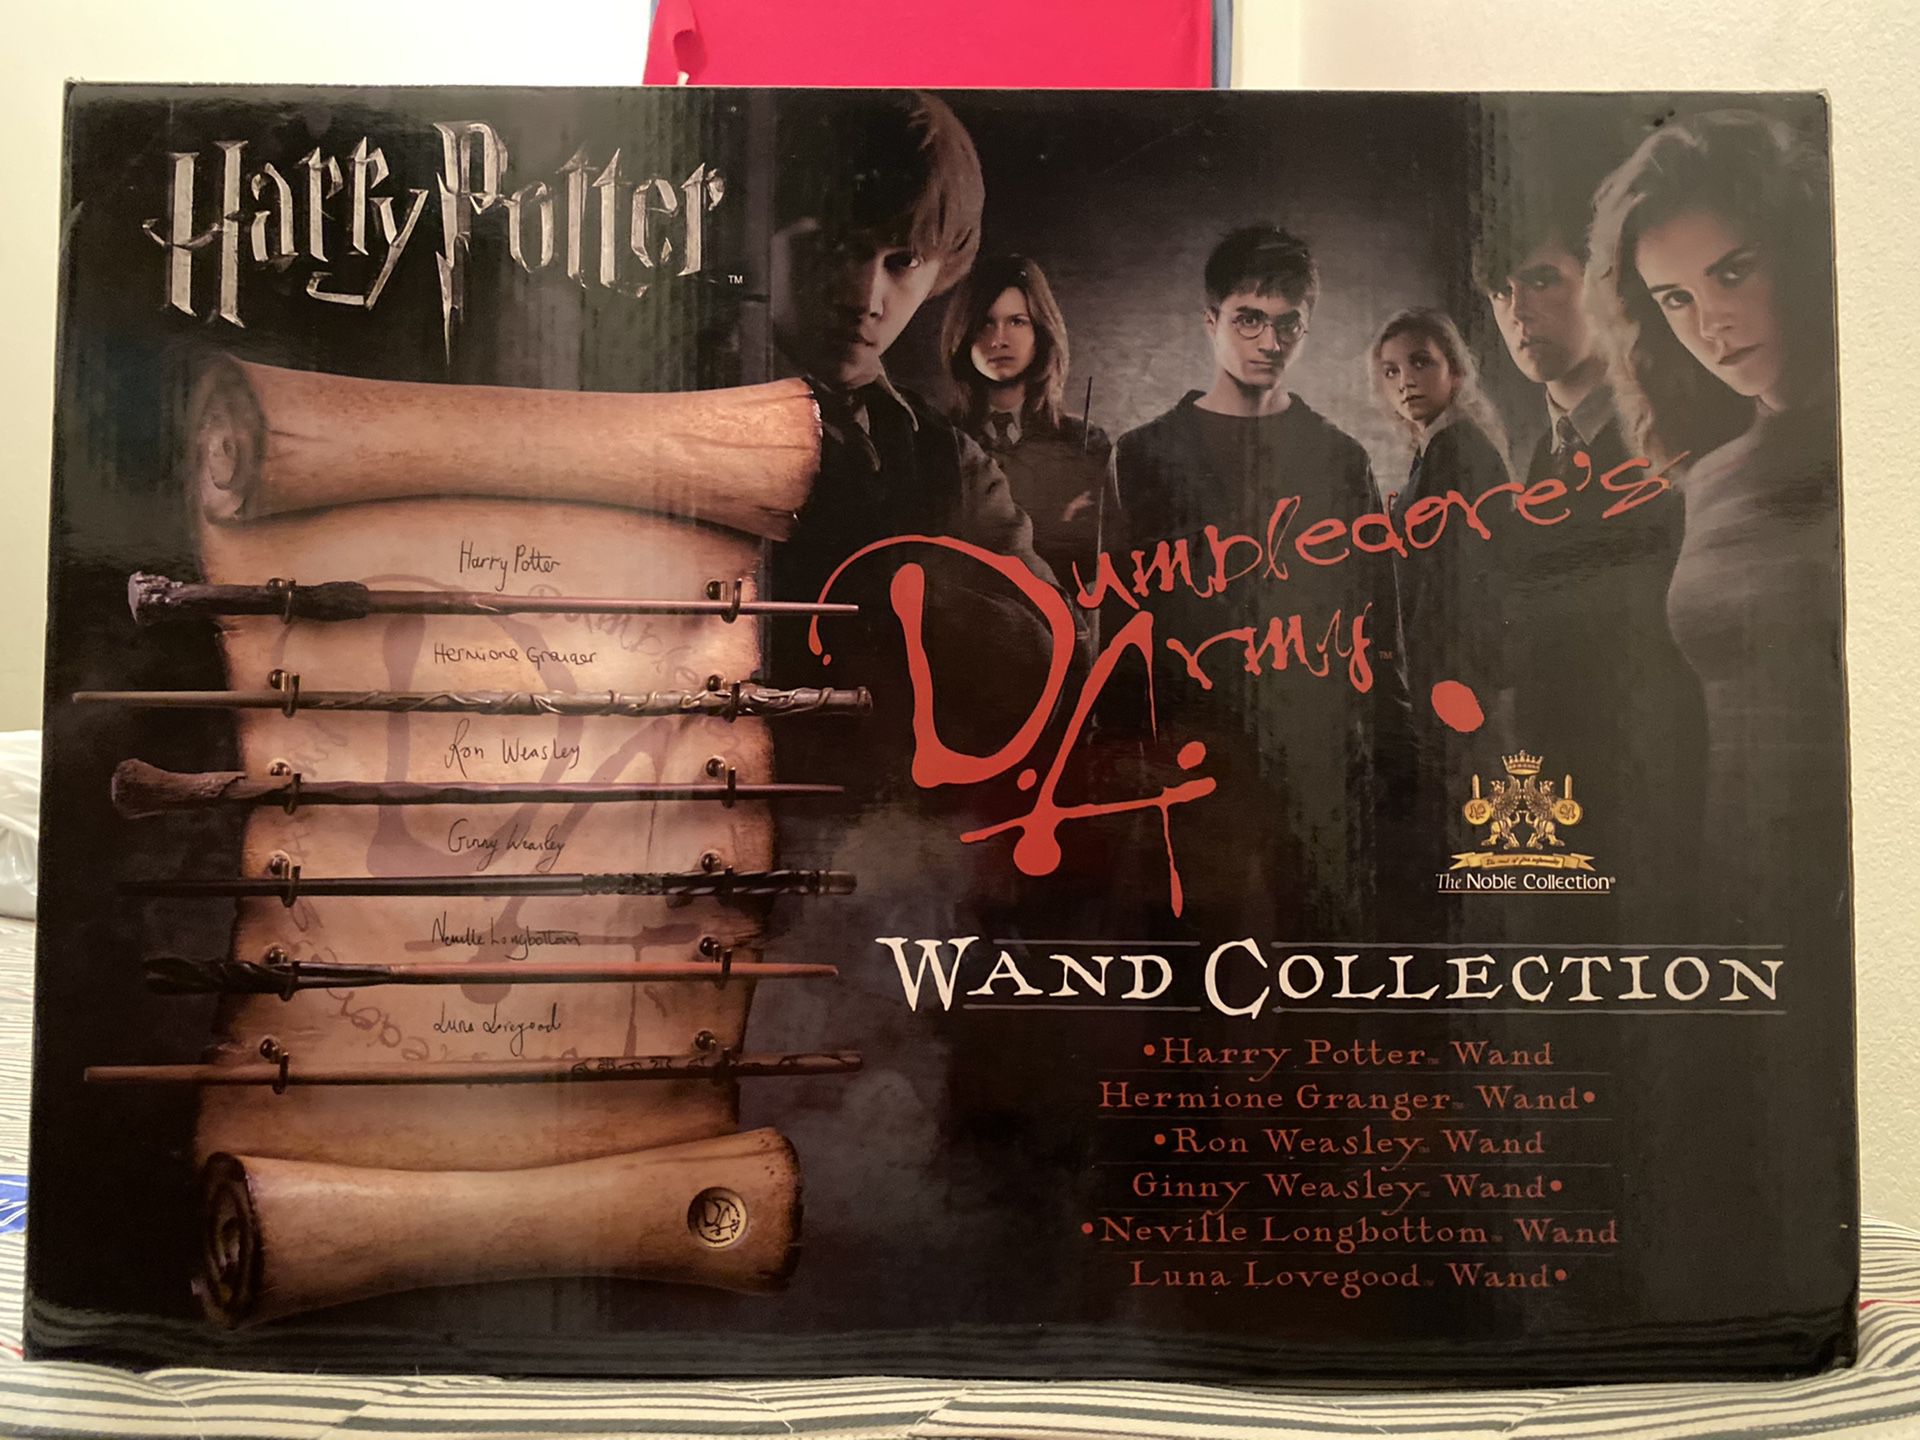 Harry Potter wand collection (Dumbledore’s Army)